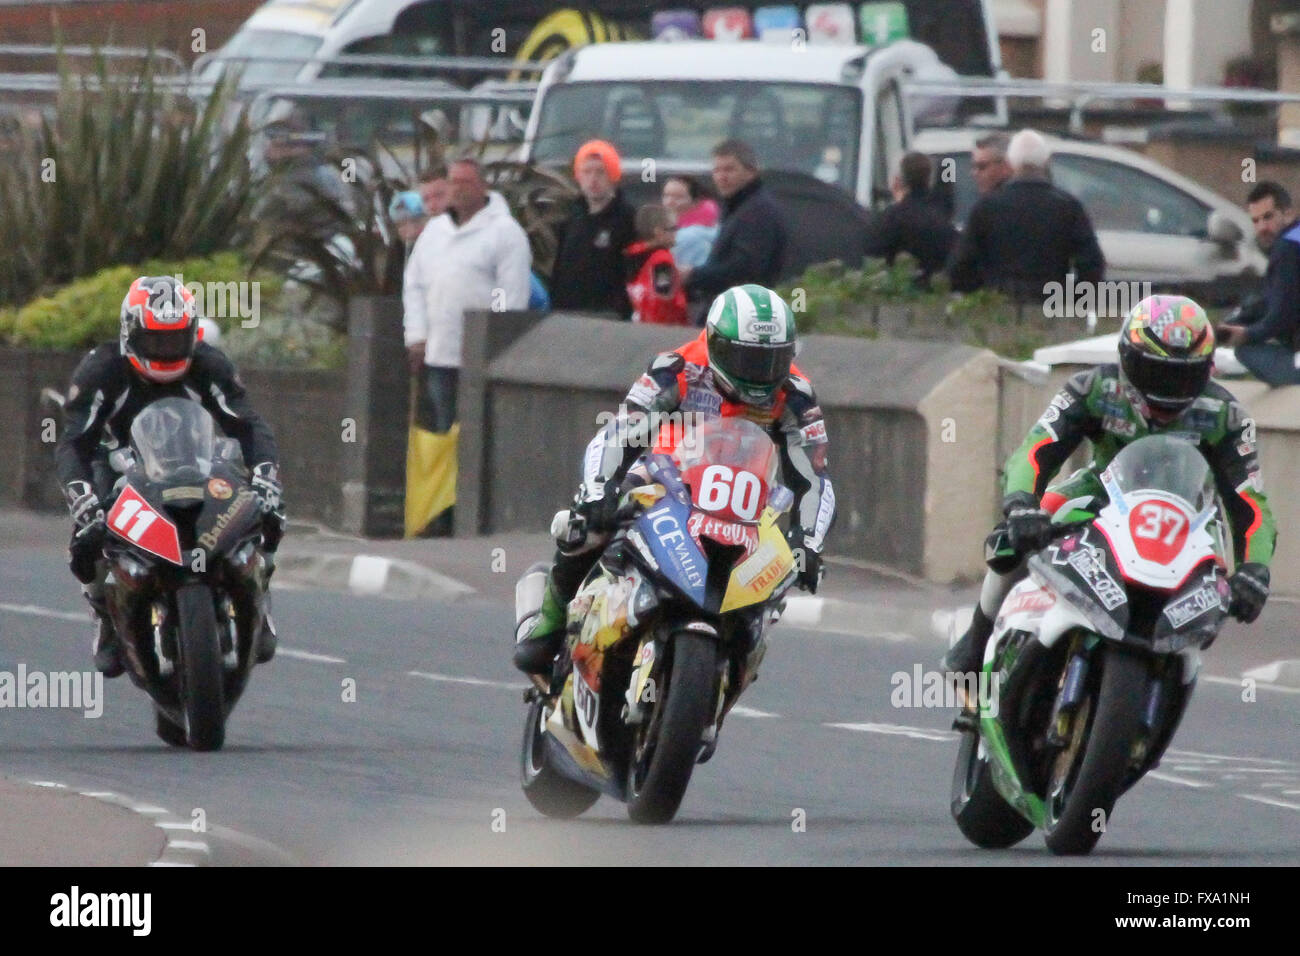 Thursday 13th May 2014 - Vauxhall International North West 200. Evening races - Superstock Qualifying - James Hillier (37) Peter Hickman (60) and Stephen Thompson (11) on the approach to York Corner on the famous Triangle Circuit. Stock Photo